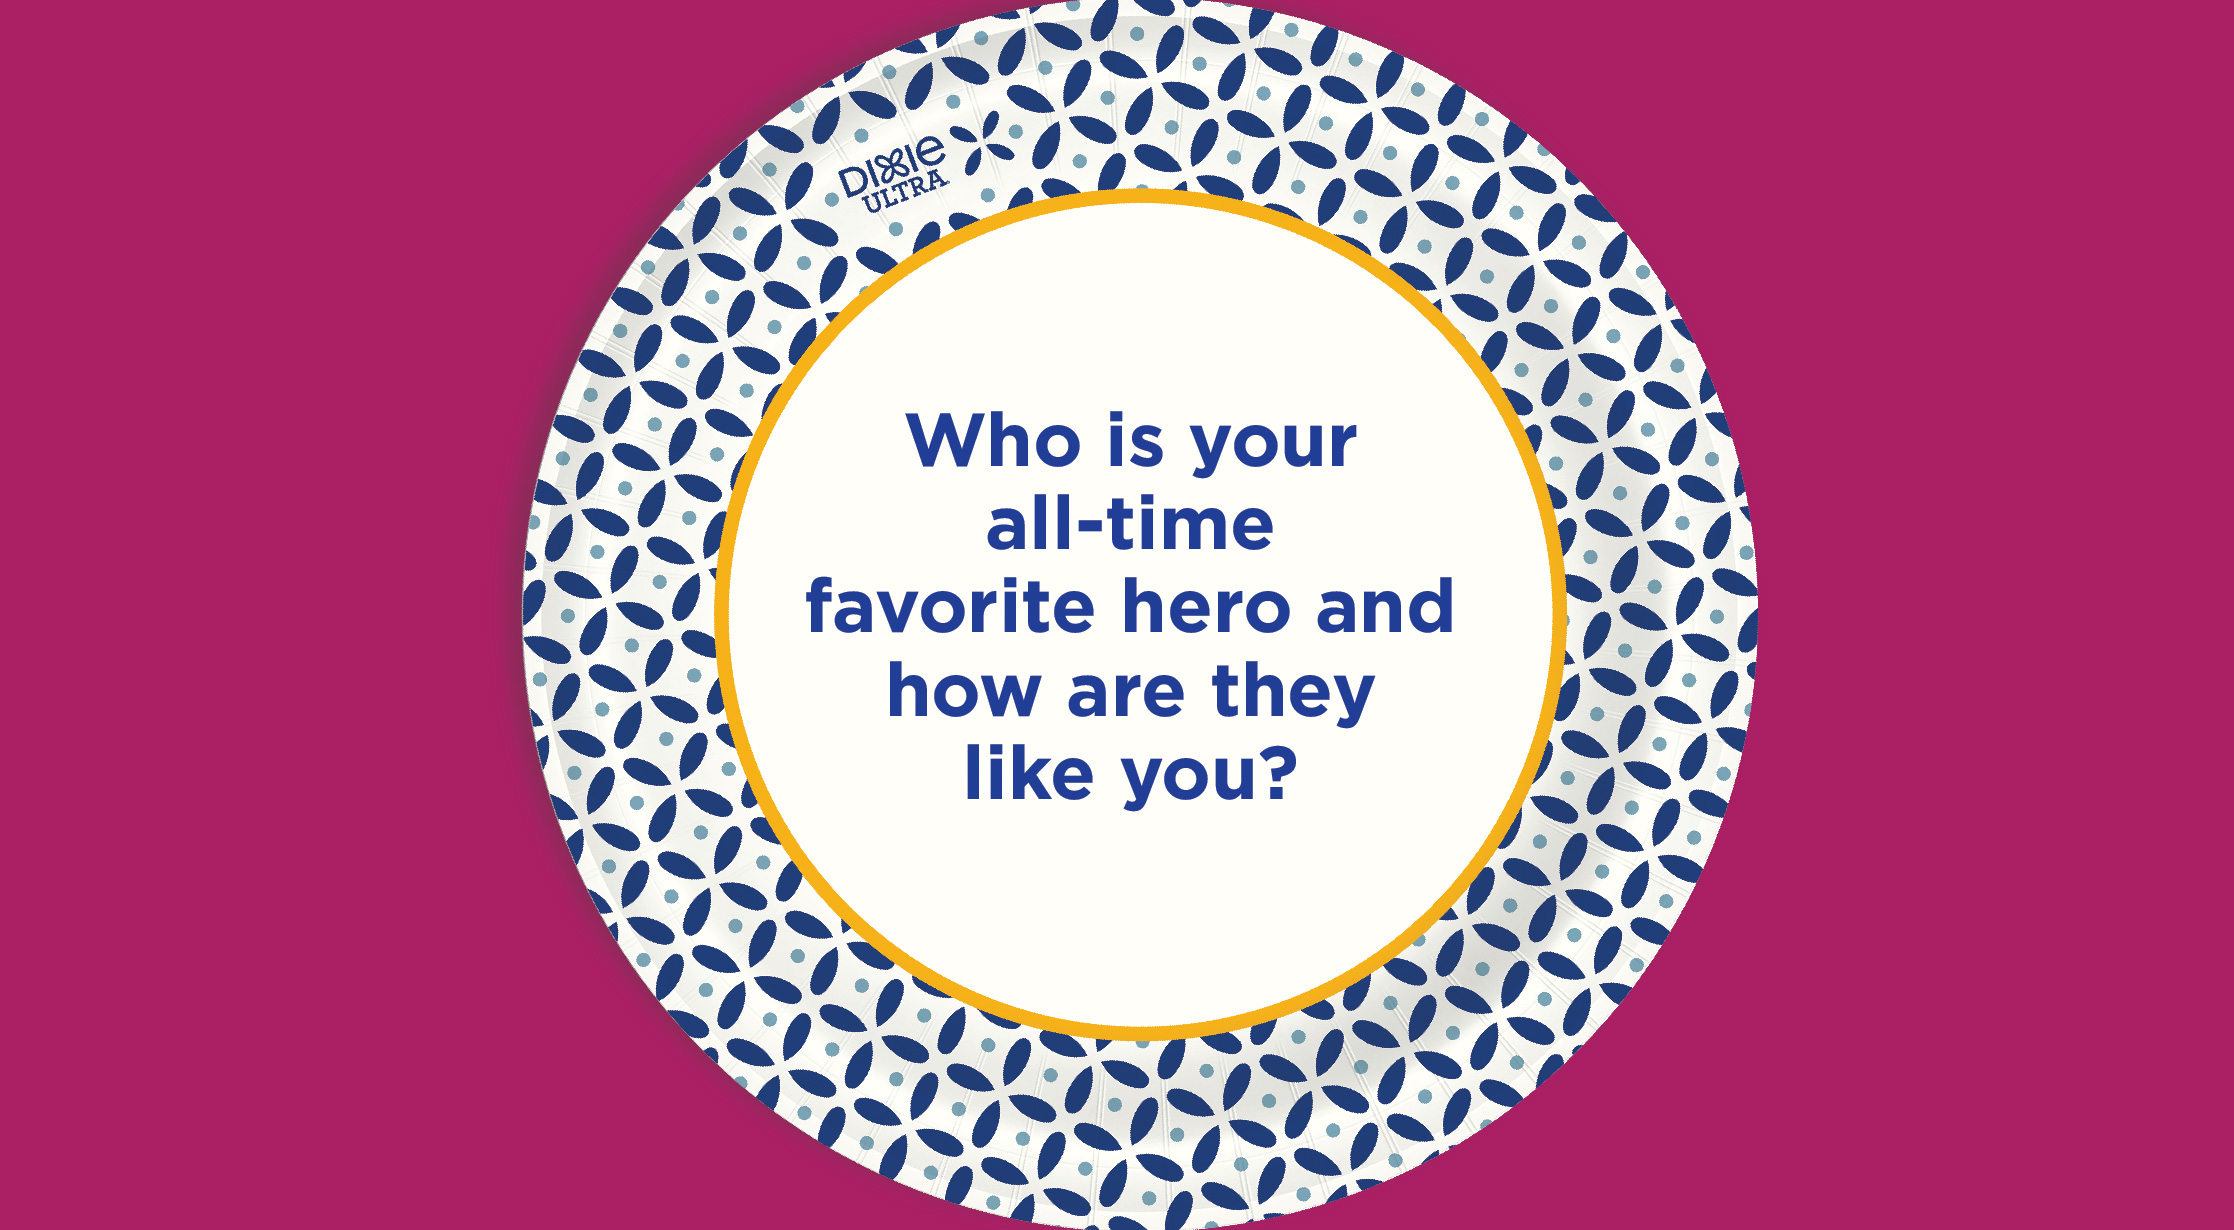 Who Is Your All-Time Favorite Hero And How Are They Like You Written On Dixie Ultra Paper Plate.